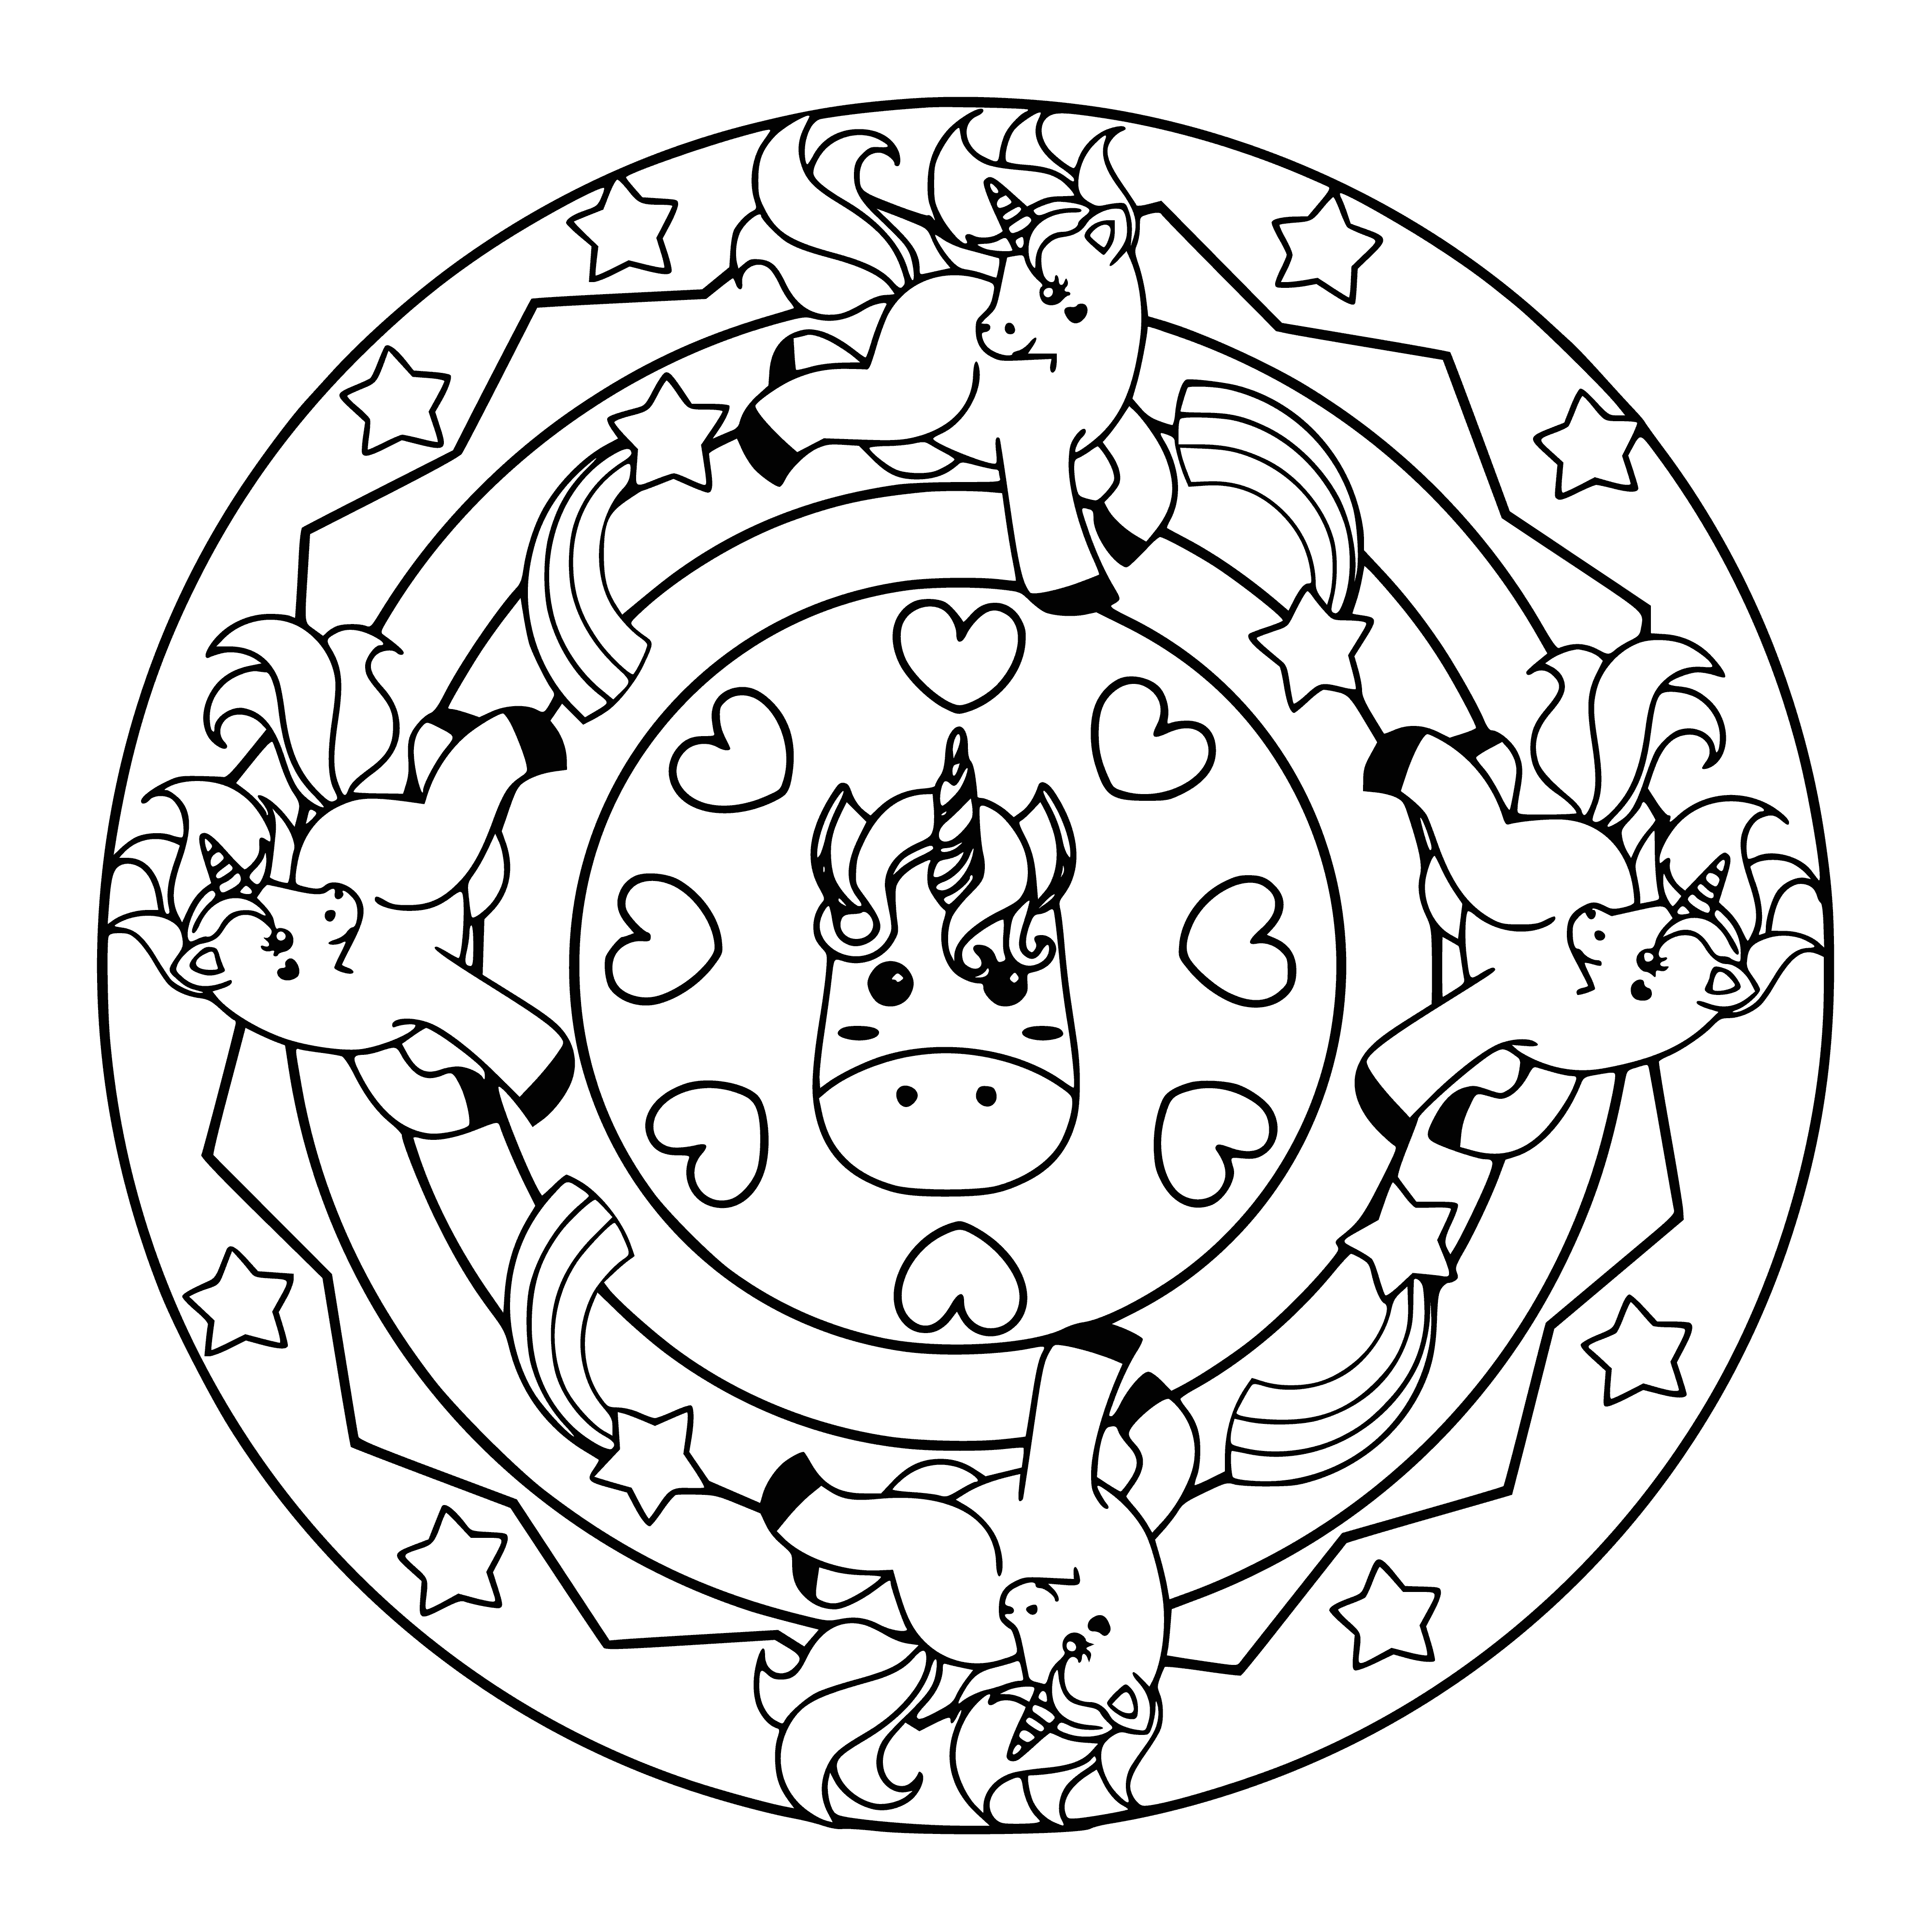 coloring page: A mandala is a spiritual/ritual symbol in Hinduism/Buddhism representing the universe, usually a circle of demonic figures surrounded by concentric circles, exhibiting radial balance.